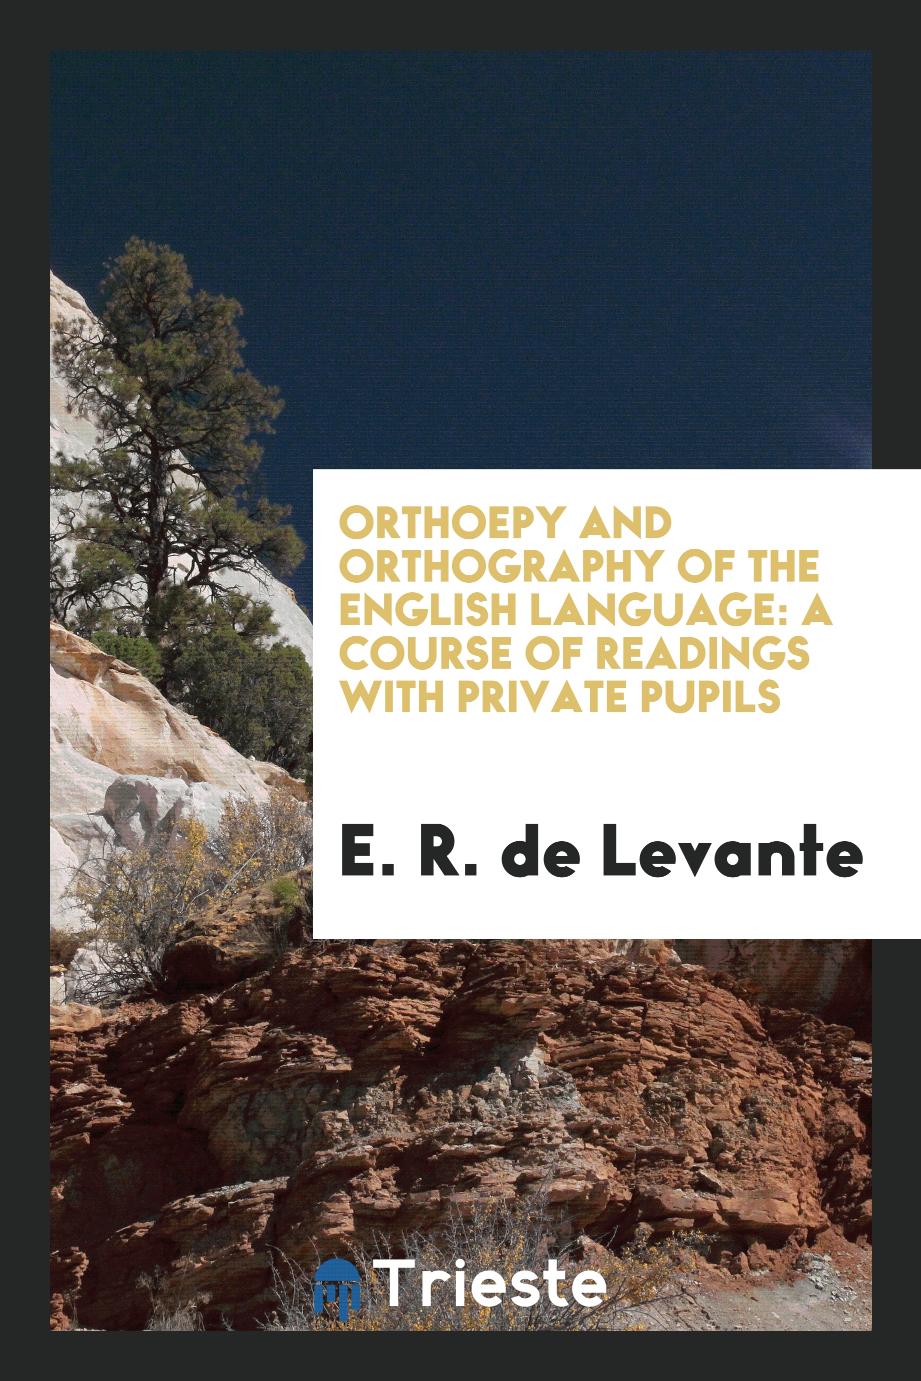 Orthoepy and Orthography of the English Language: A Course of Readings with Private Pupils